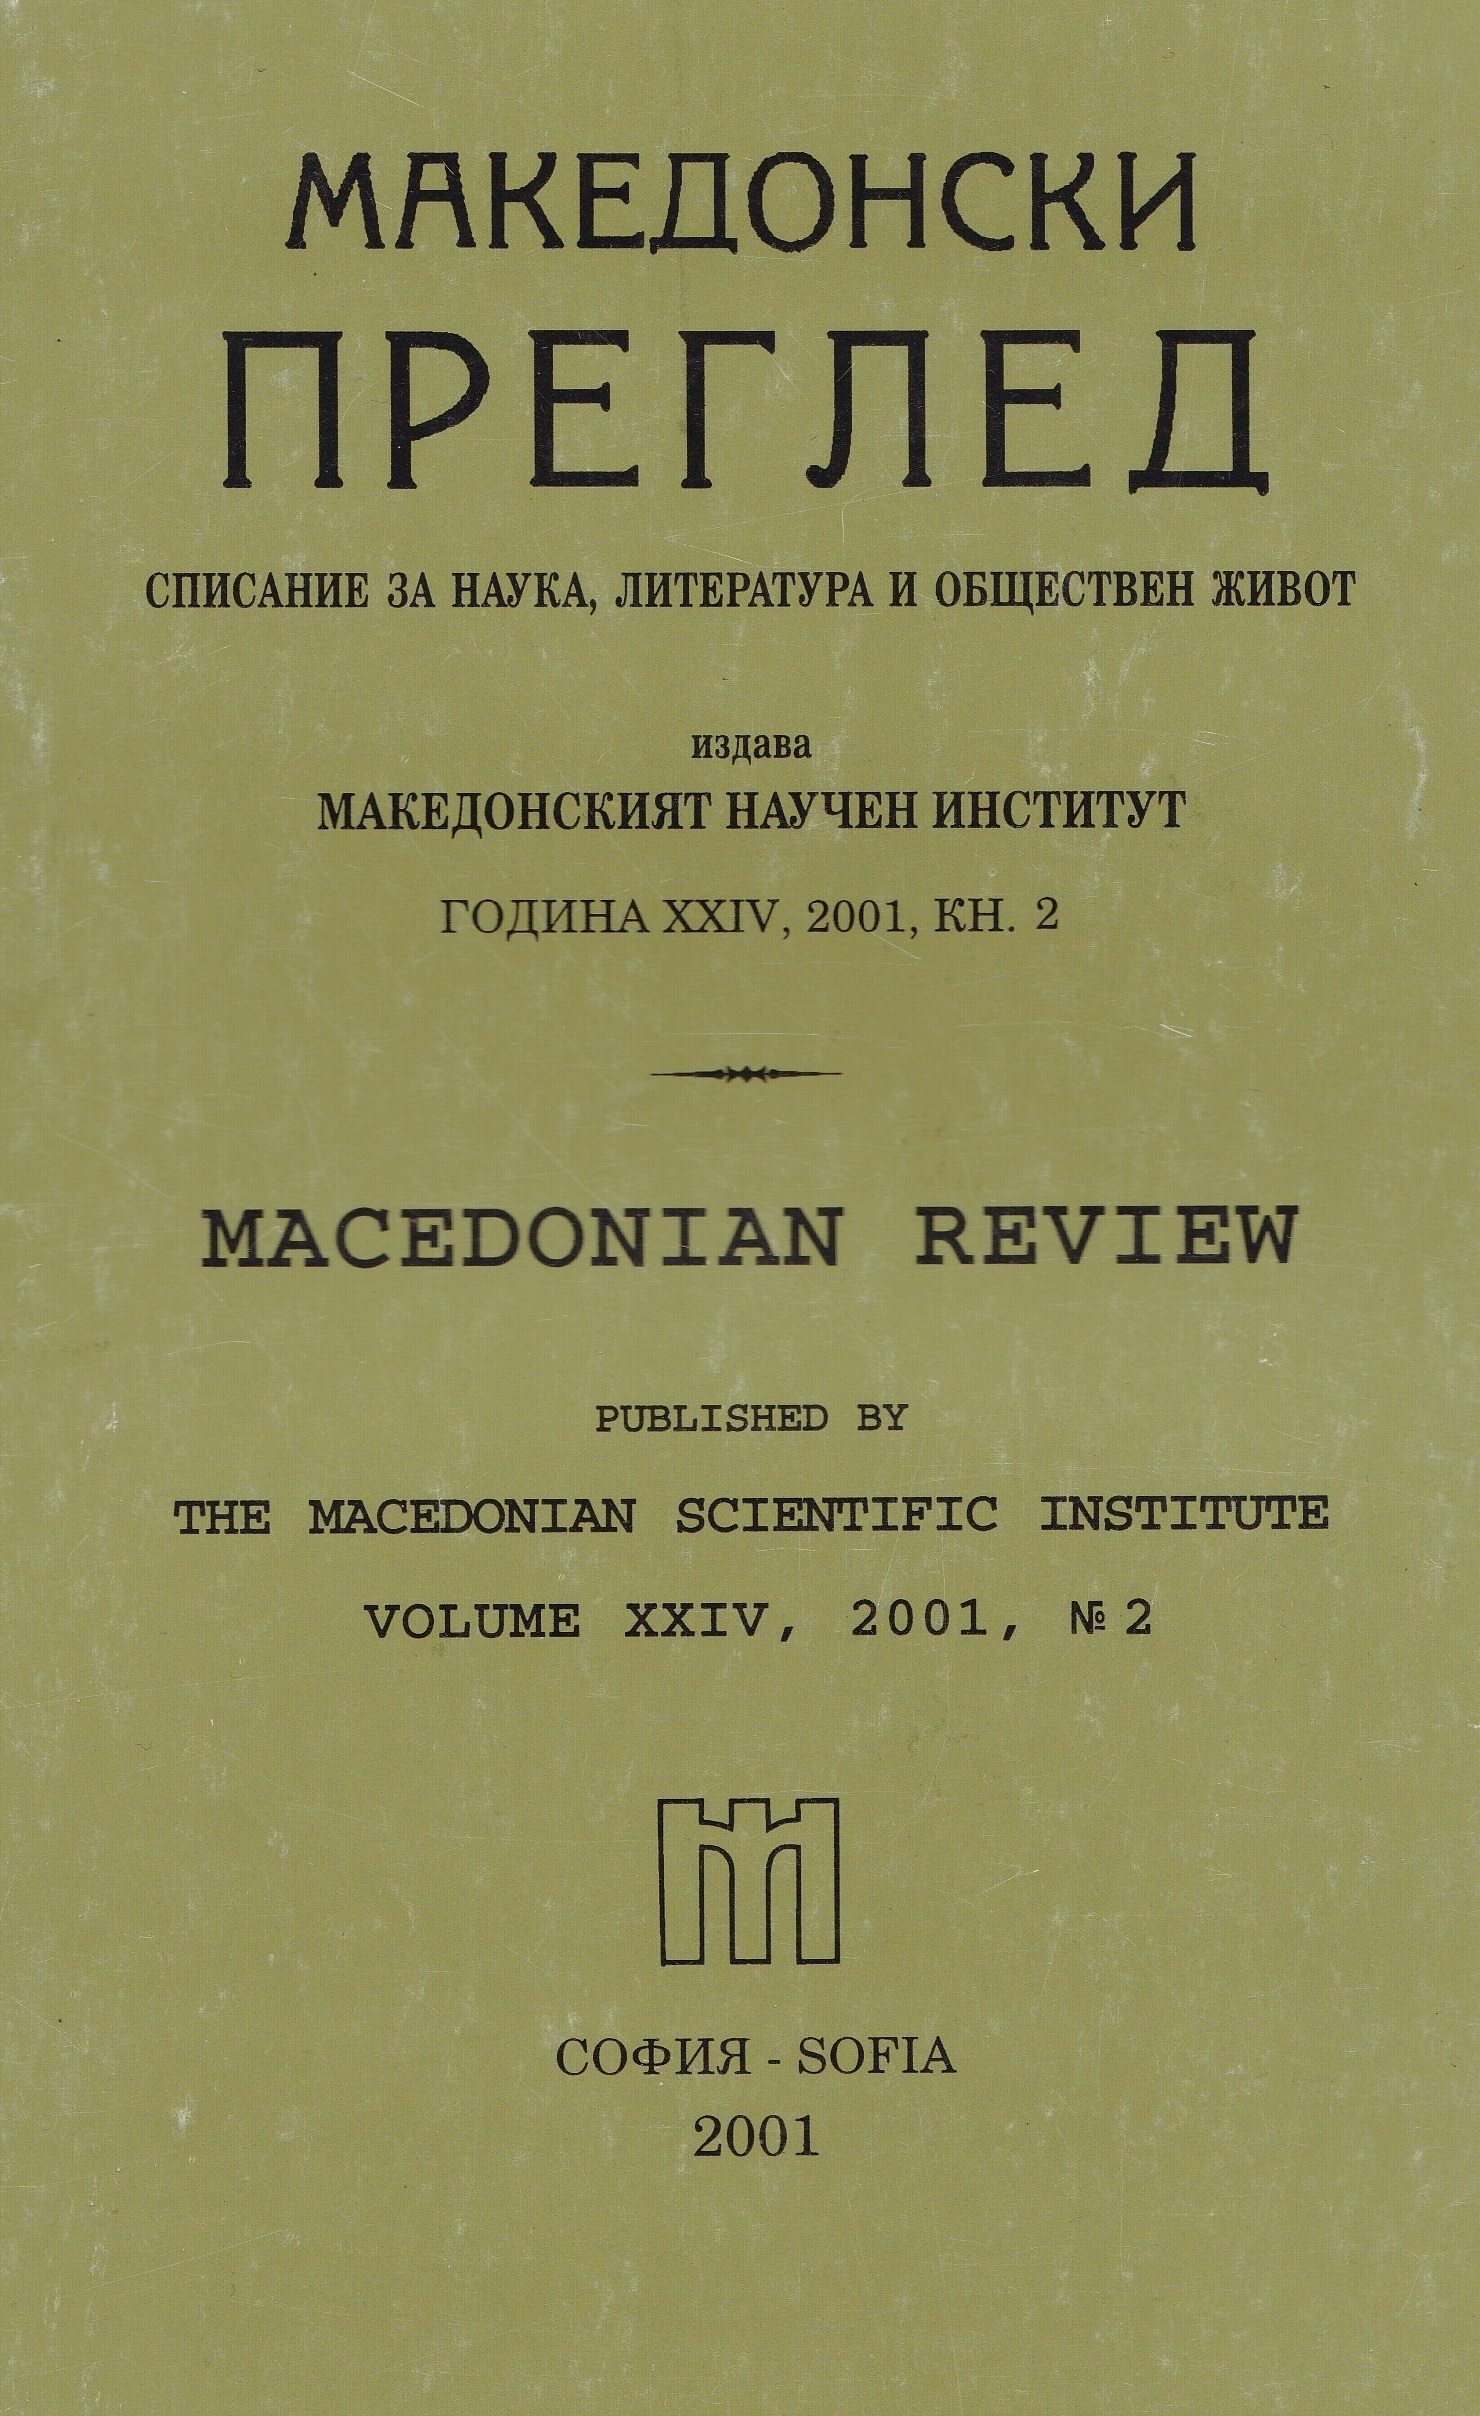 On the ‘Ъ Phoneme and Its Use in “Stenographic Notes of the First Language Committee (facsimile), Skopje, 2000” Cover Image